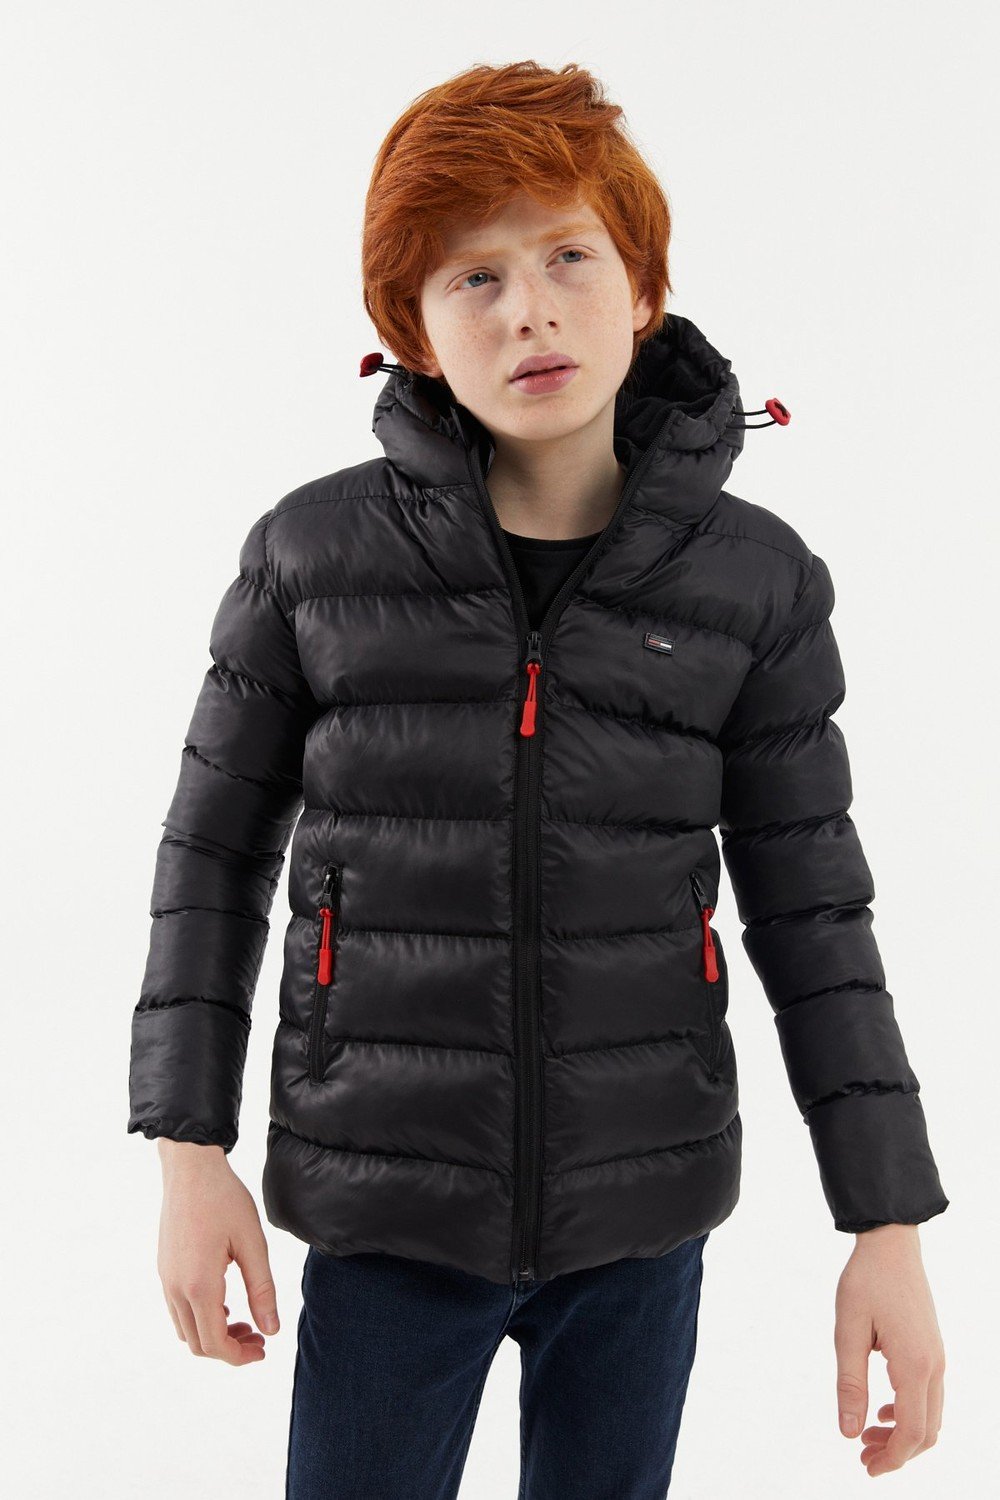 River Club Boys' Waterproof And Windproof Thick Lined Black Hooded Coat.